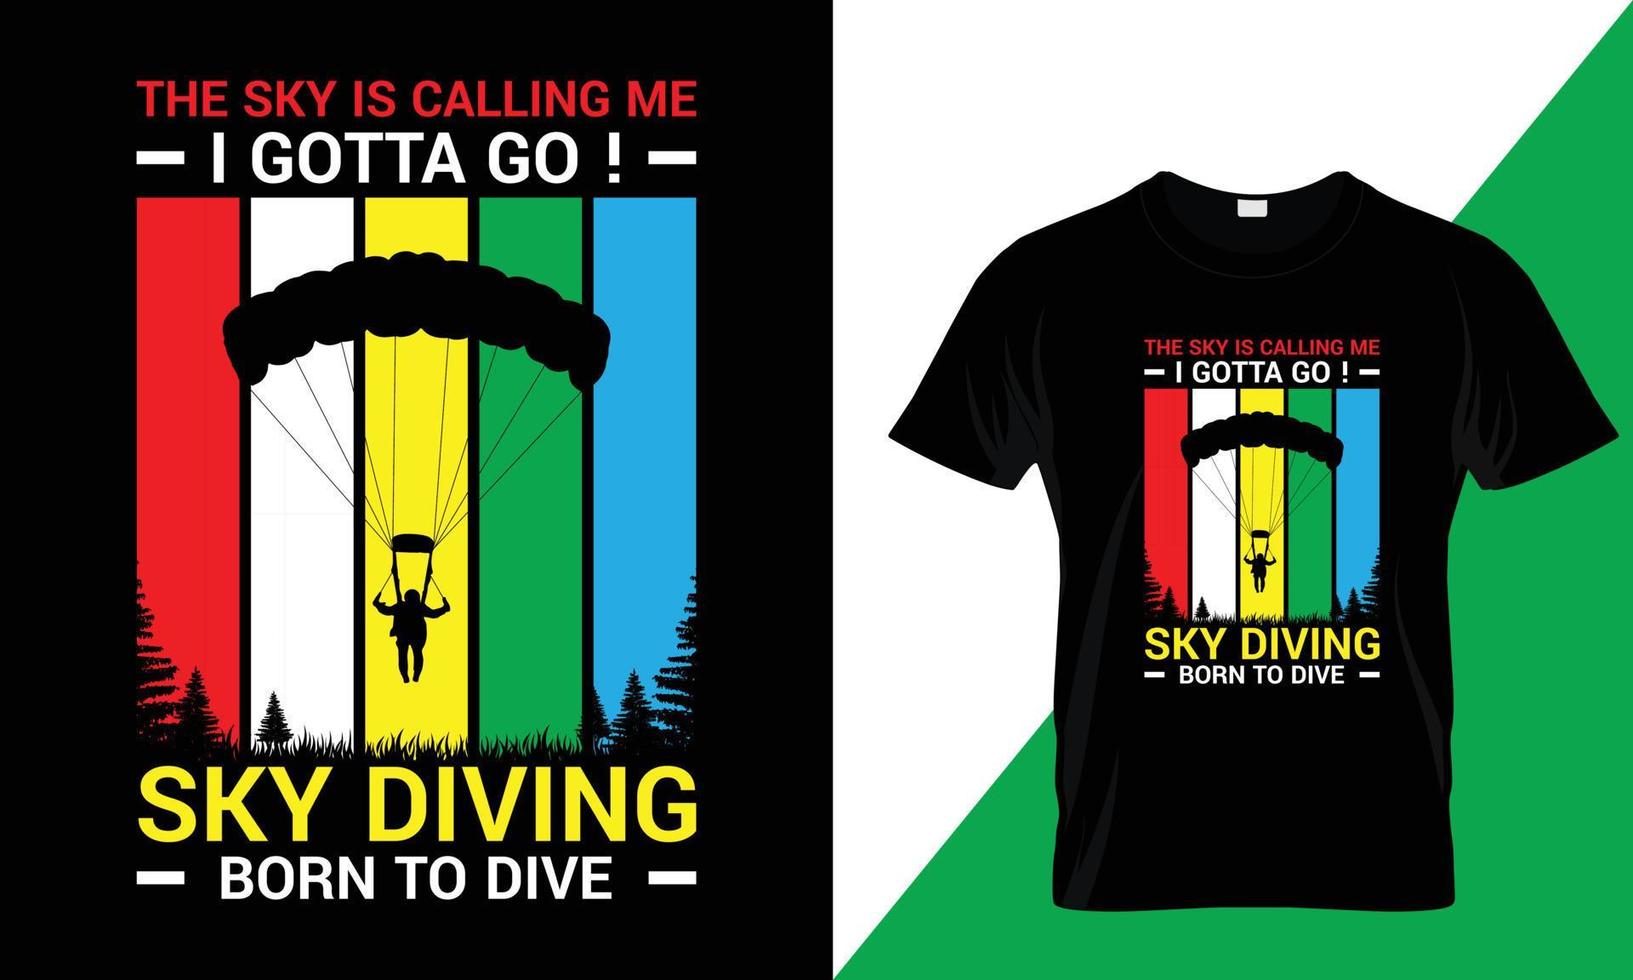 The sky is calling me, I gotta go skydiving bron to dive t shirt design vector